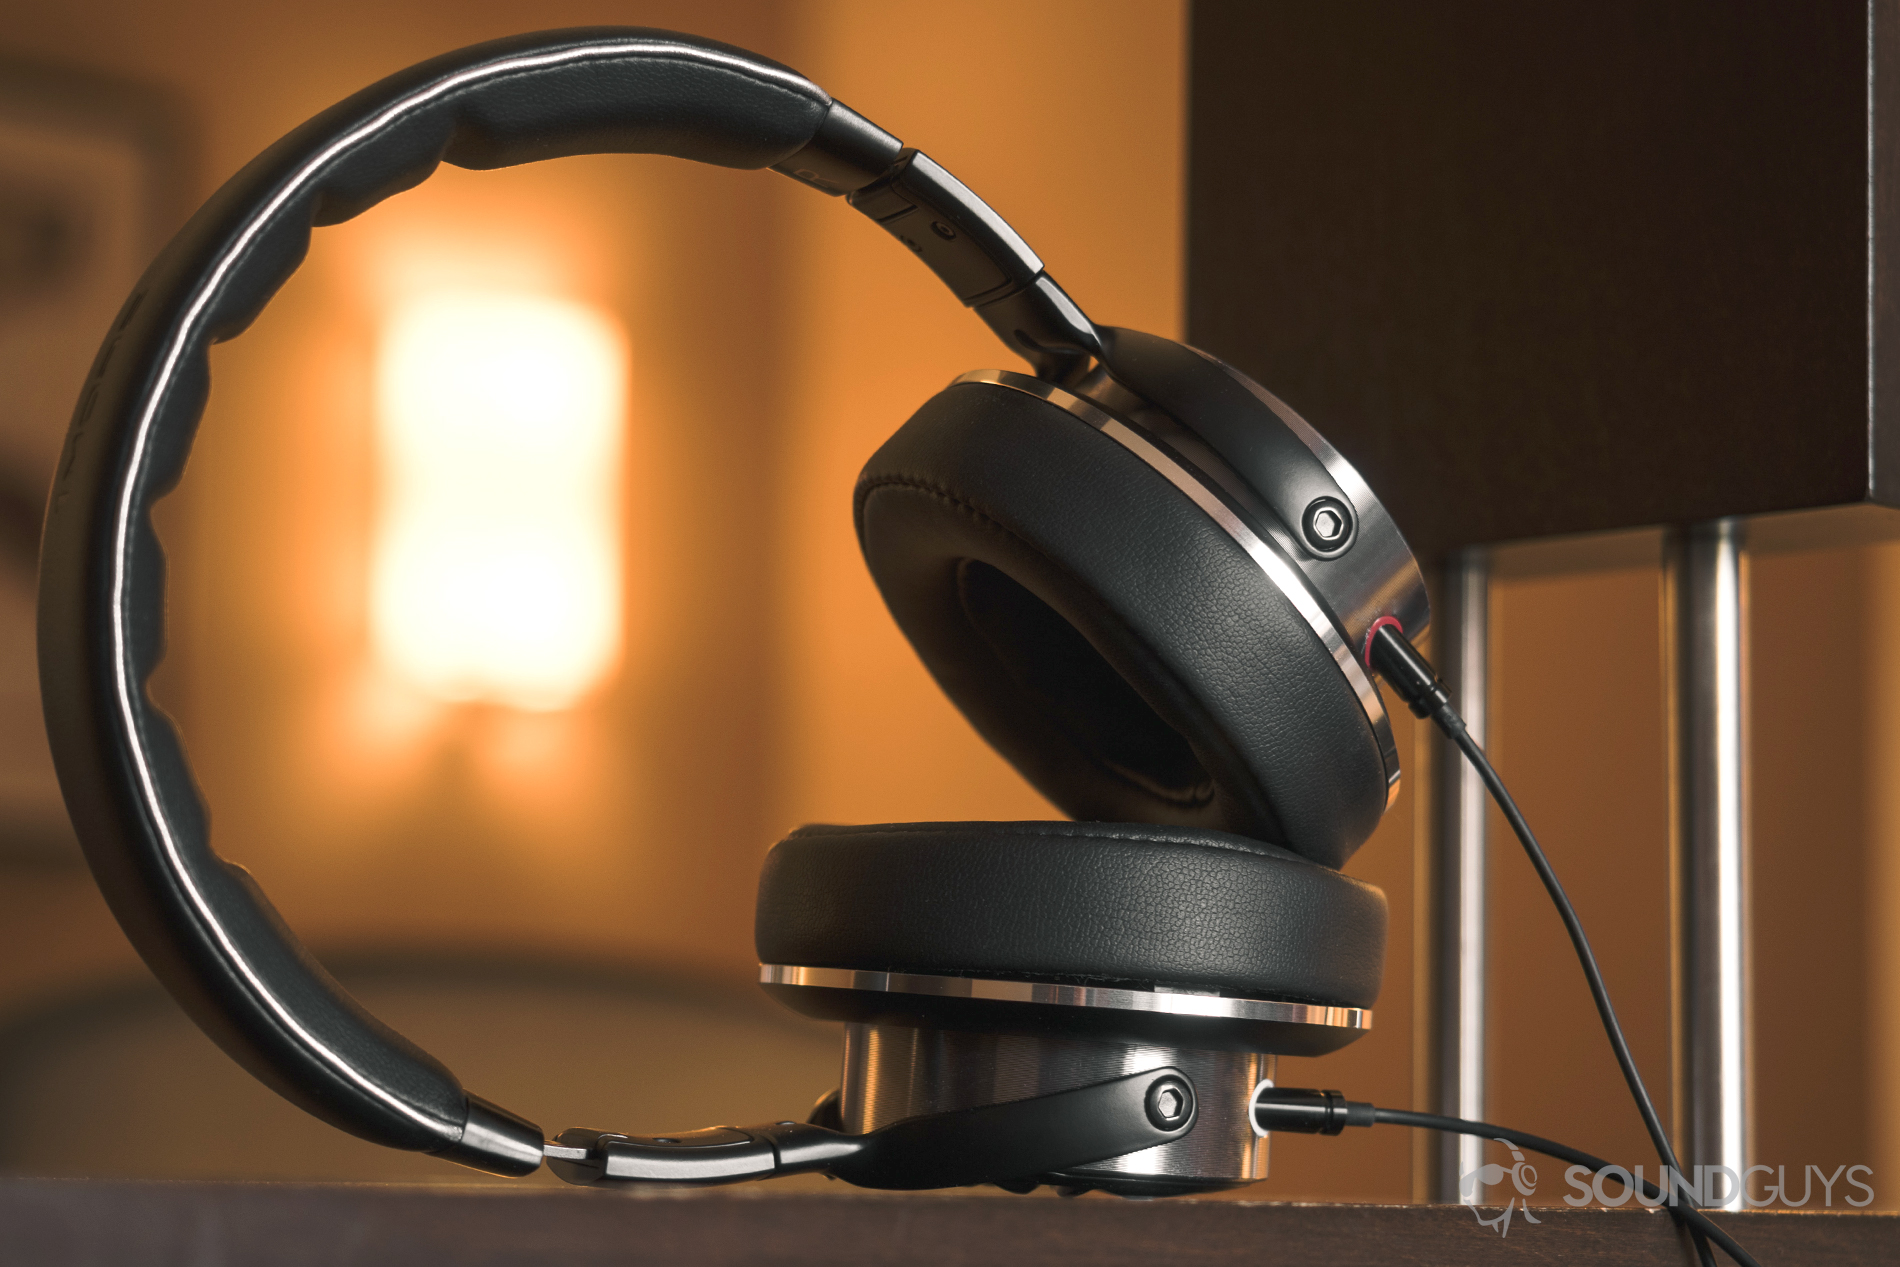 1More Triple-Driver Over-Ear review: A profile image of the headphones (fully in frame).